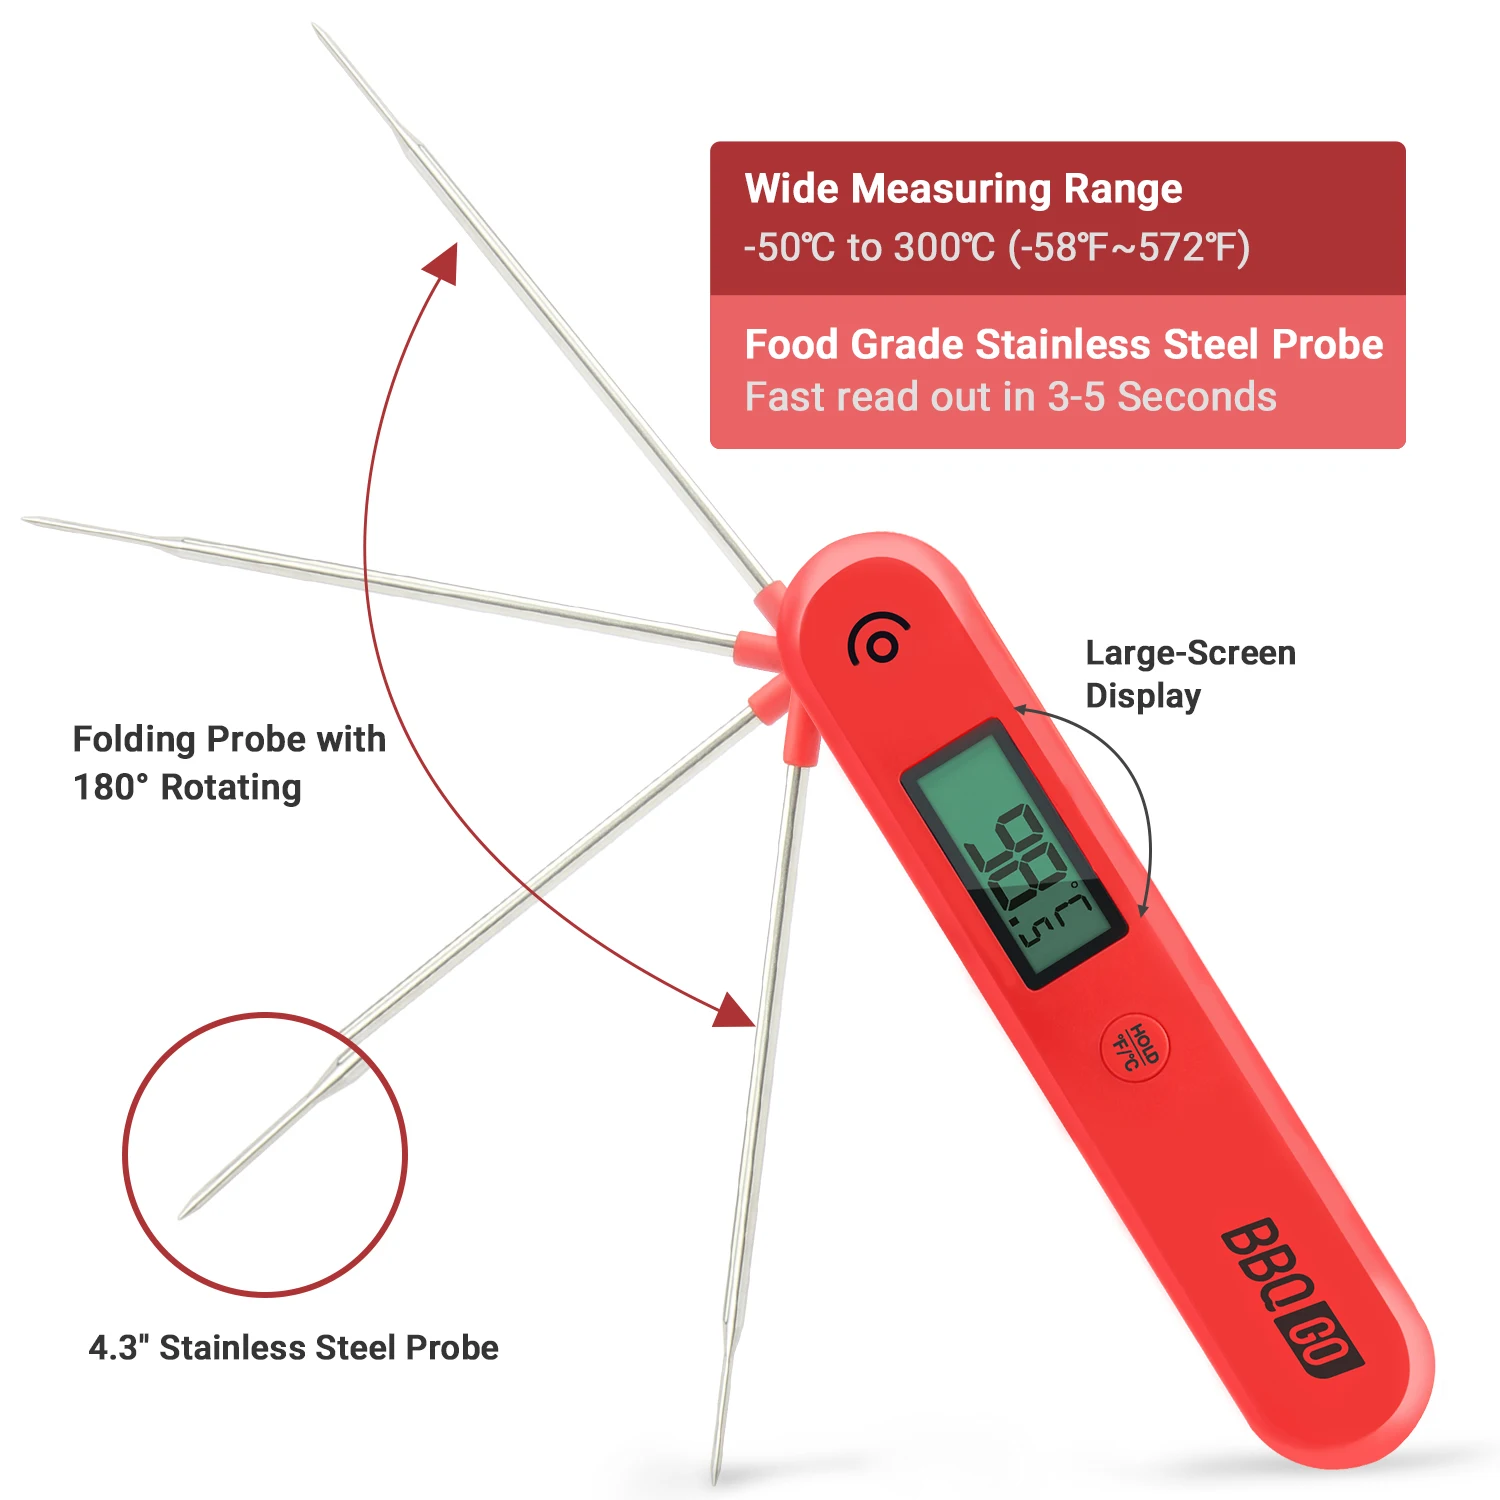 https://ae01.alicdn.com/kf/H7c3e14d22d264c1eb5aac0140ac241ceG/INKBIRD-Dedicate-Meat-Thermometer-With-A-Storage-Case-Kitchen-Star-Sets-Digital-Cooking-Food-Probe-BBQ.jpg